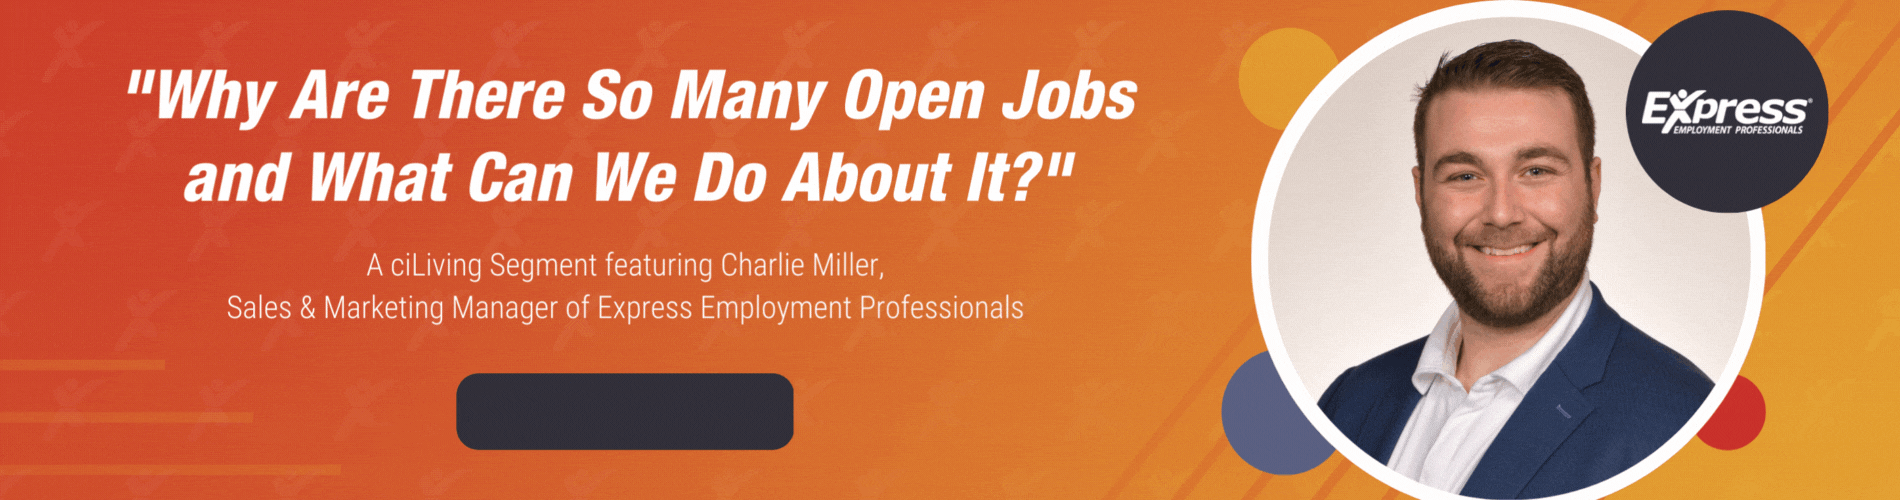 Why are there so many open jobs and what can we do about it?